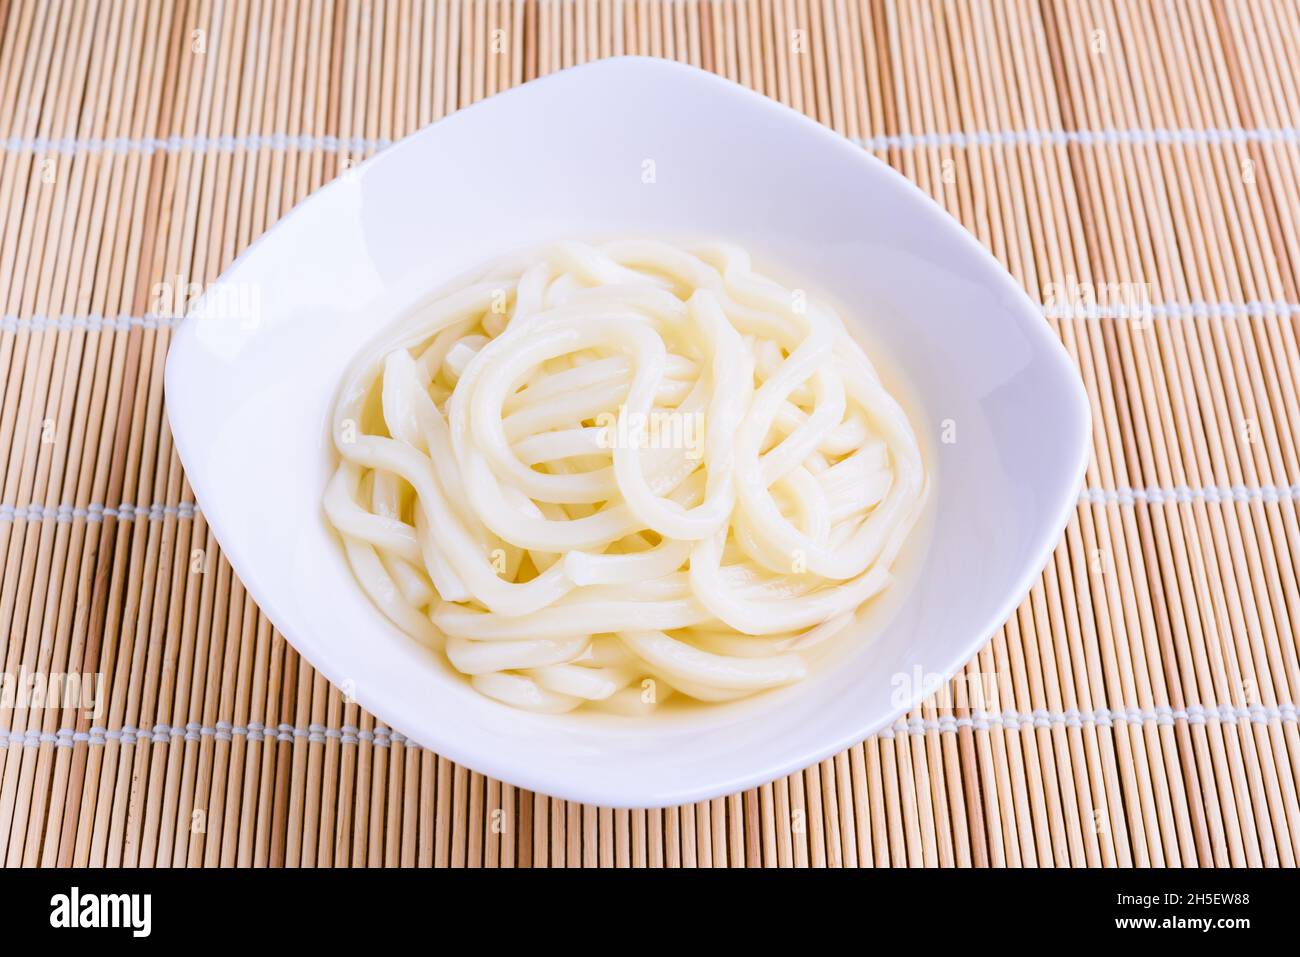 Freshly prepared Japanese udon noodles in white bowl on bamboo mat Stock Photo